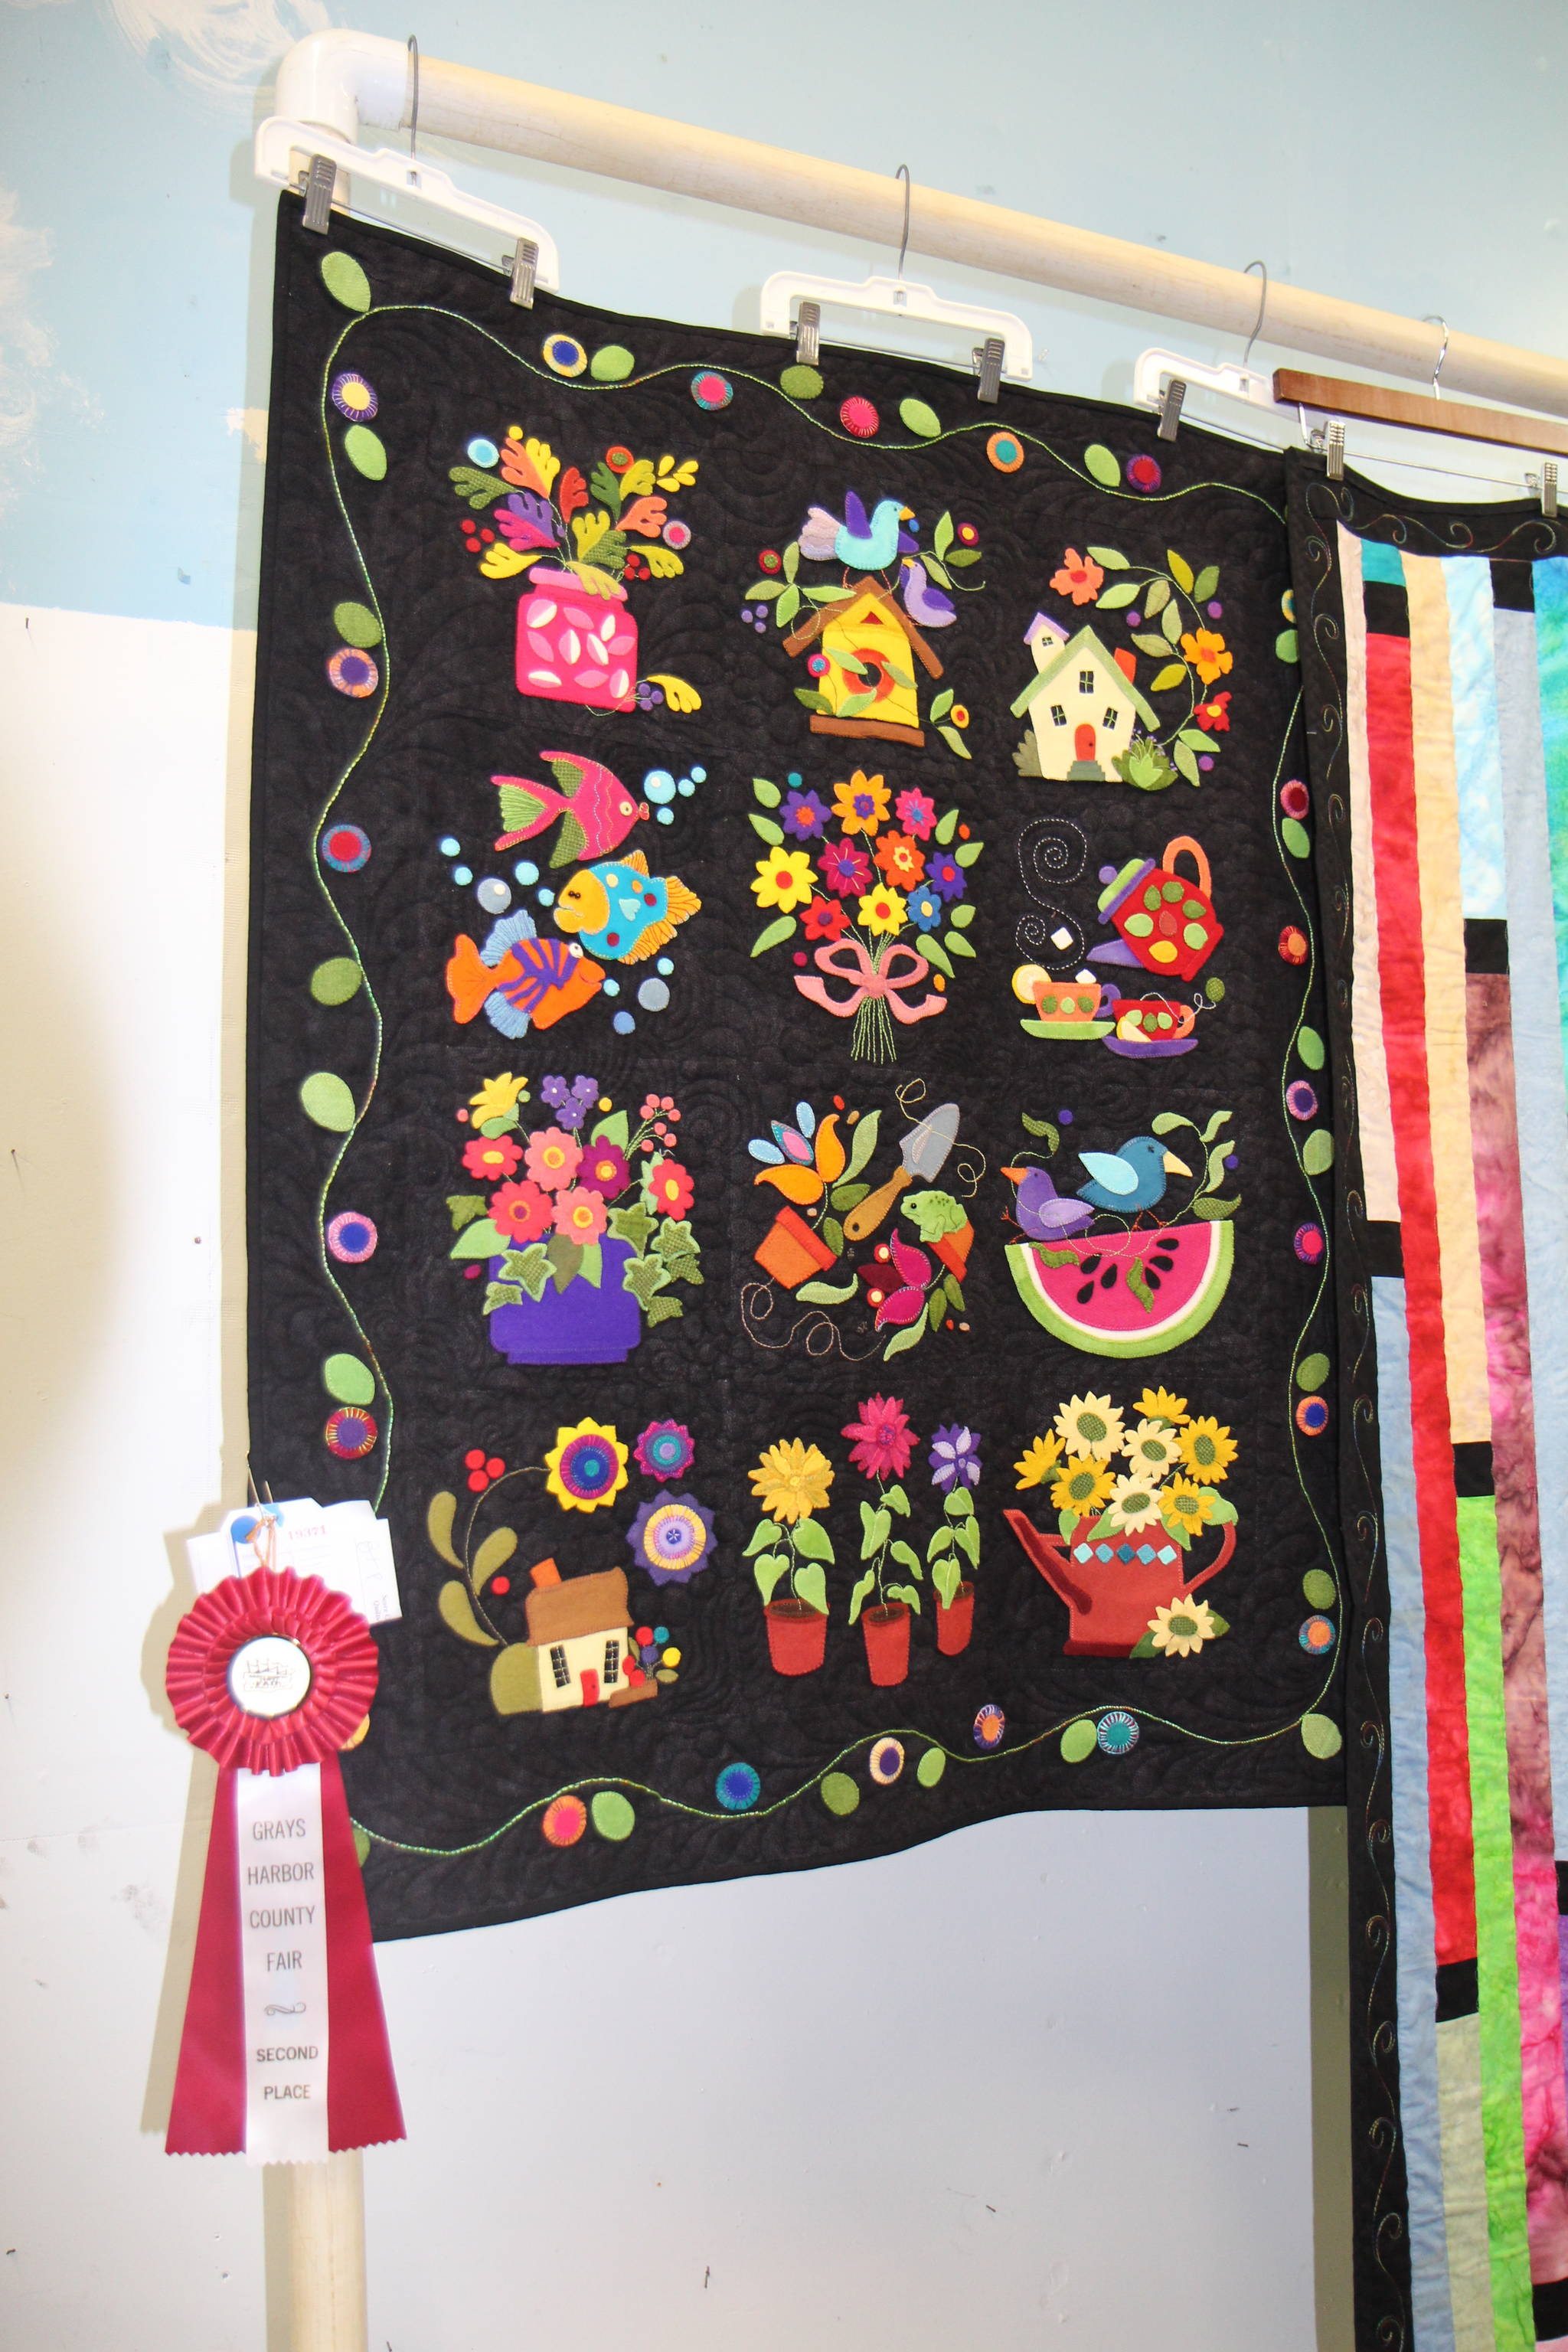 A ribbon-winning quilt hangs Monday at the Grays Harbor County Fairgrounds in Elma.